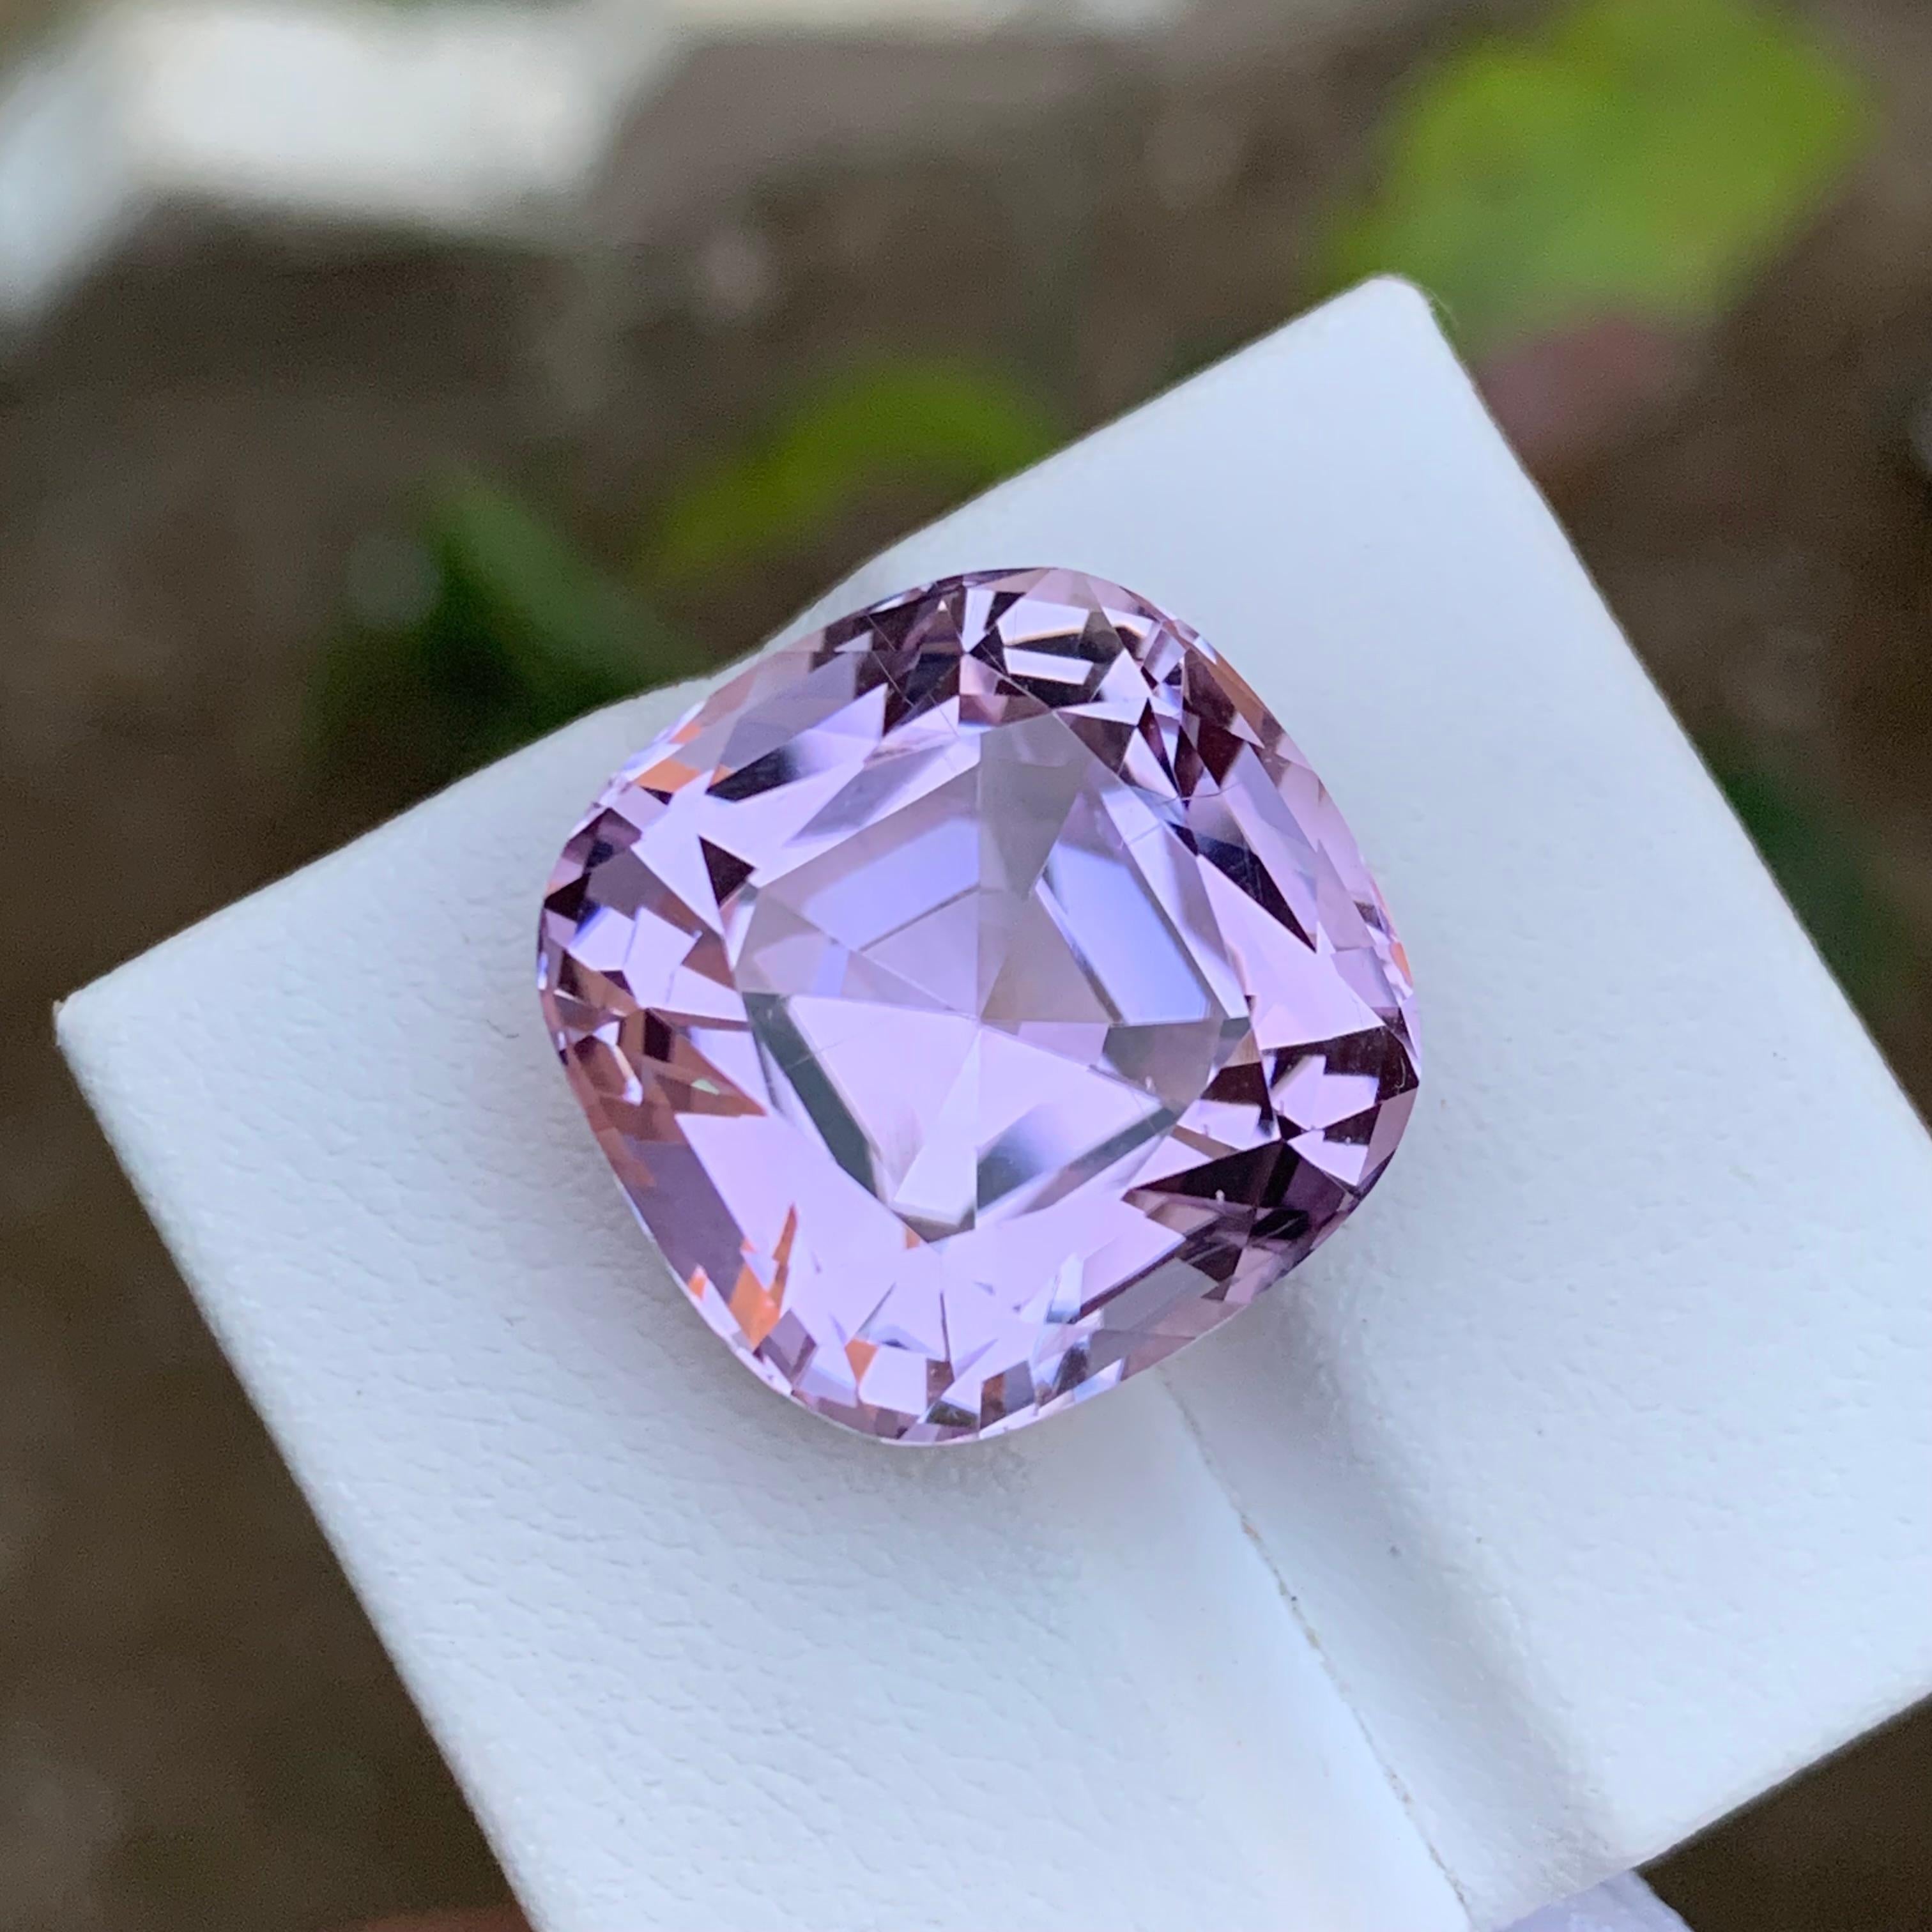 GEMSTONE TYPE: Kunzite
PIECE(S): 1
WEIGHT: 26.10 Carats
SHAPE: Square Cushion
SIZE (MM): 17.33 x 17.27 x 12.54
COLOR: Purple Pink
CLARITY: Approx Eye Clean
TREATMENT: Heated
ORIGIN: Afghanistan
CERTIFICATE: On demand

A very breathtaking rare purple